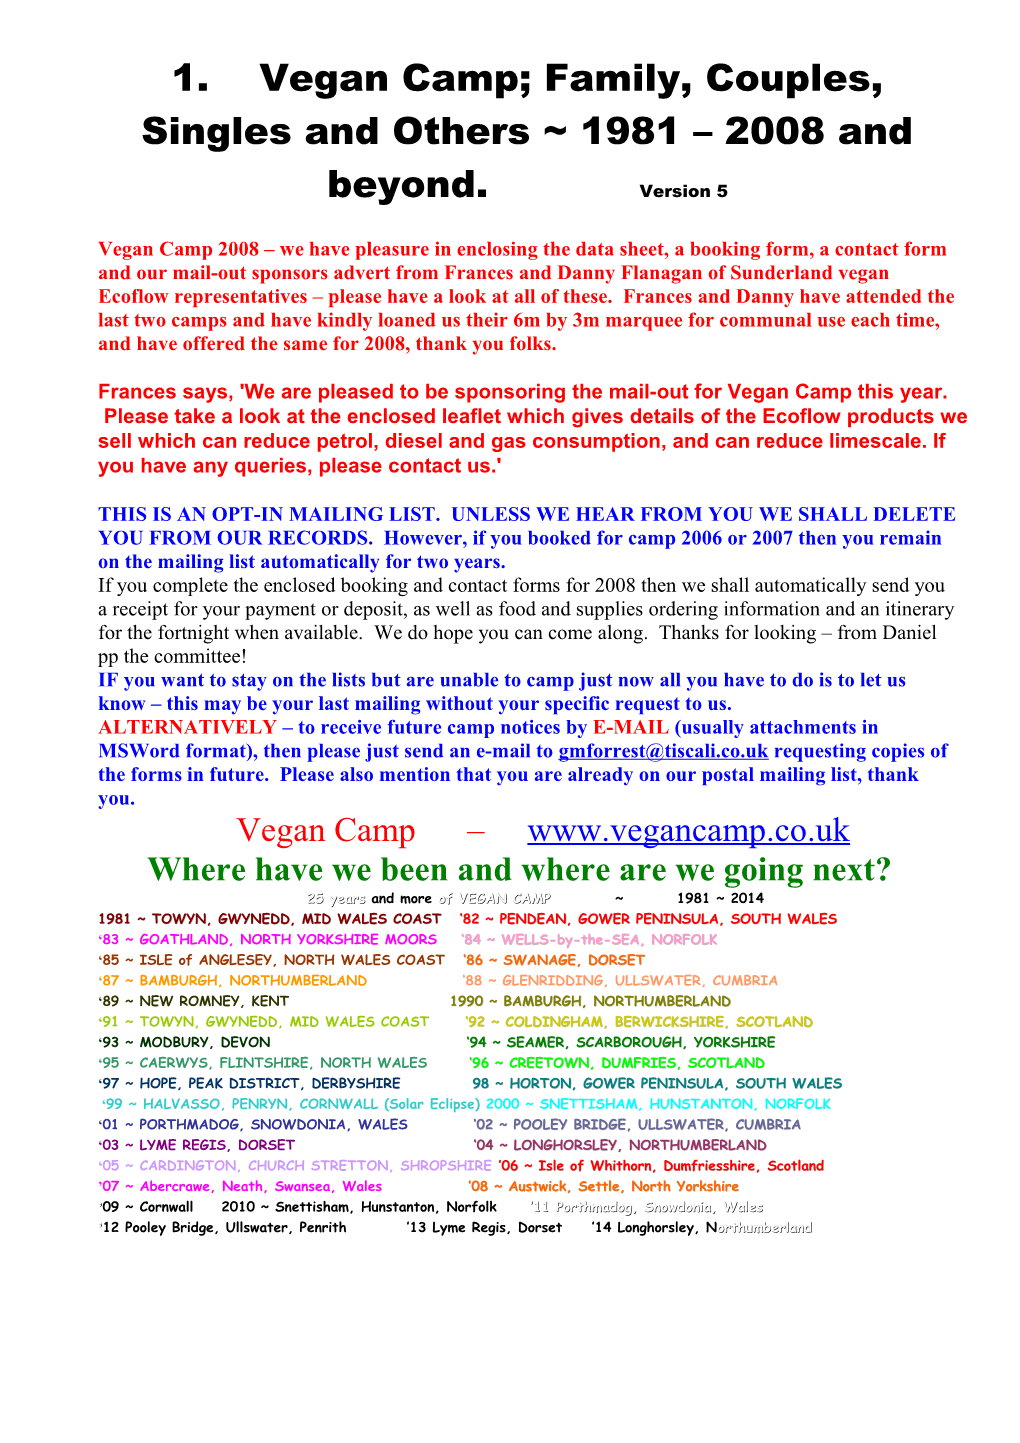 Vegan Camp 2007 We Have Pleasure in Enclosing the Data Sheet, a Booking Form, a Contact